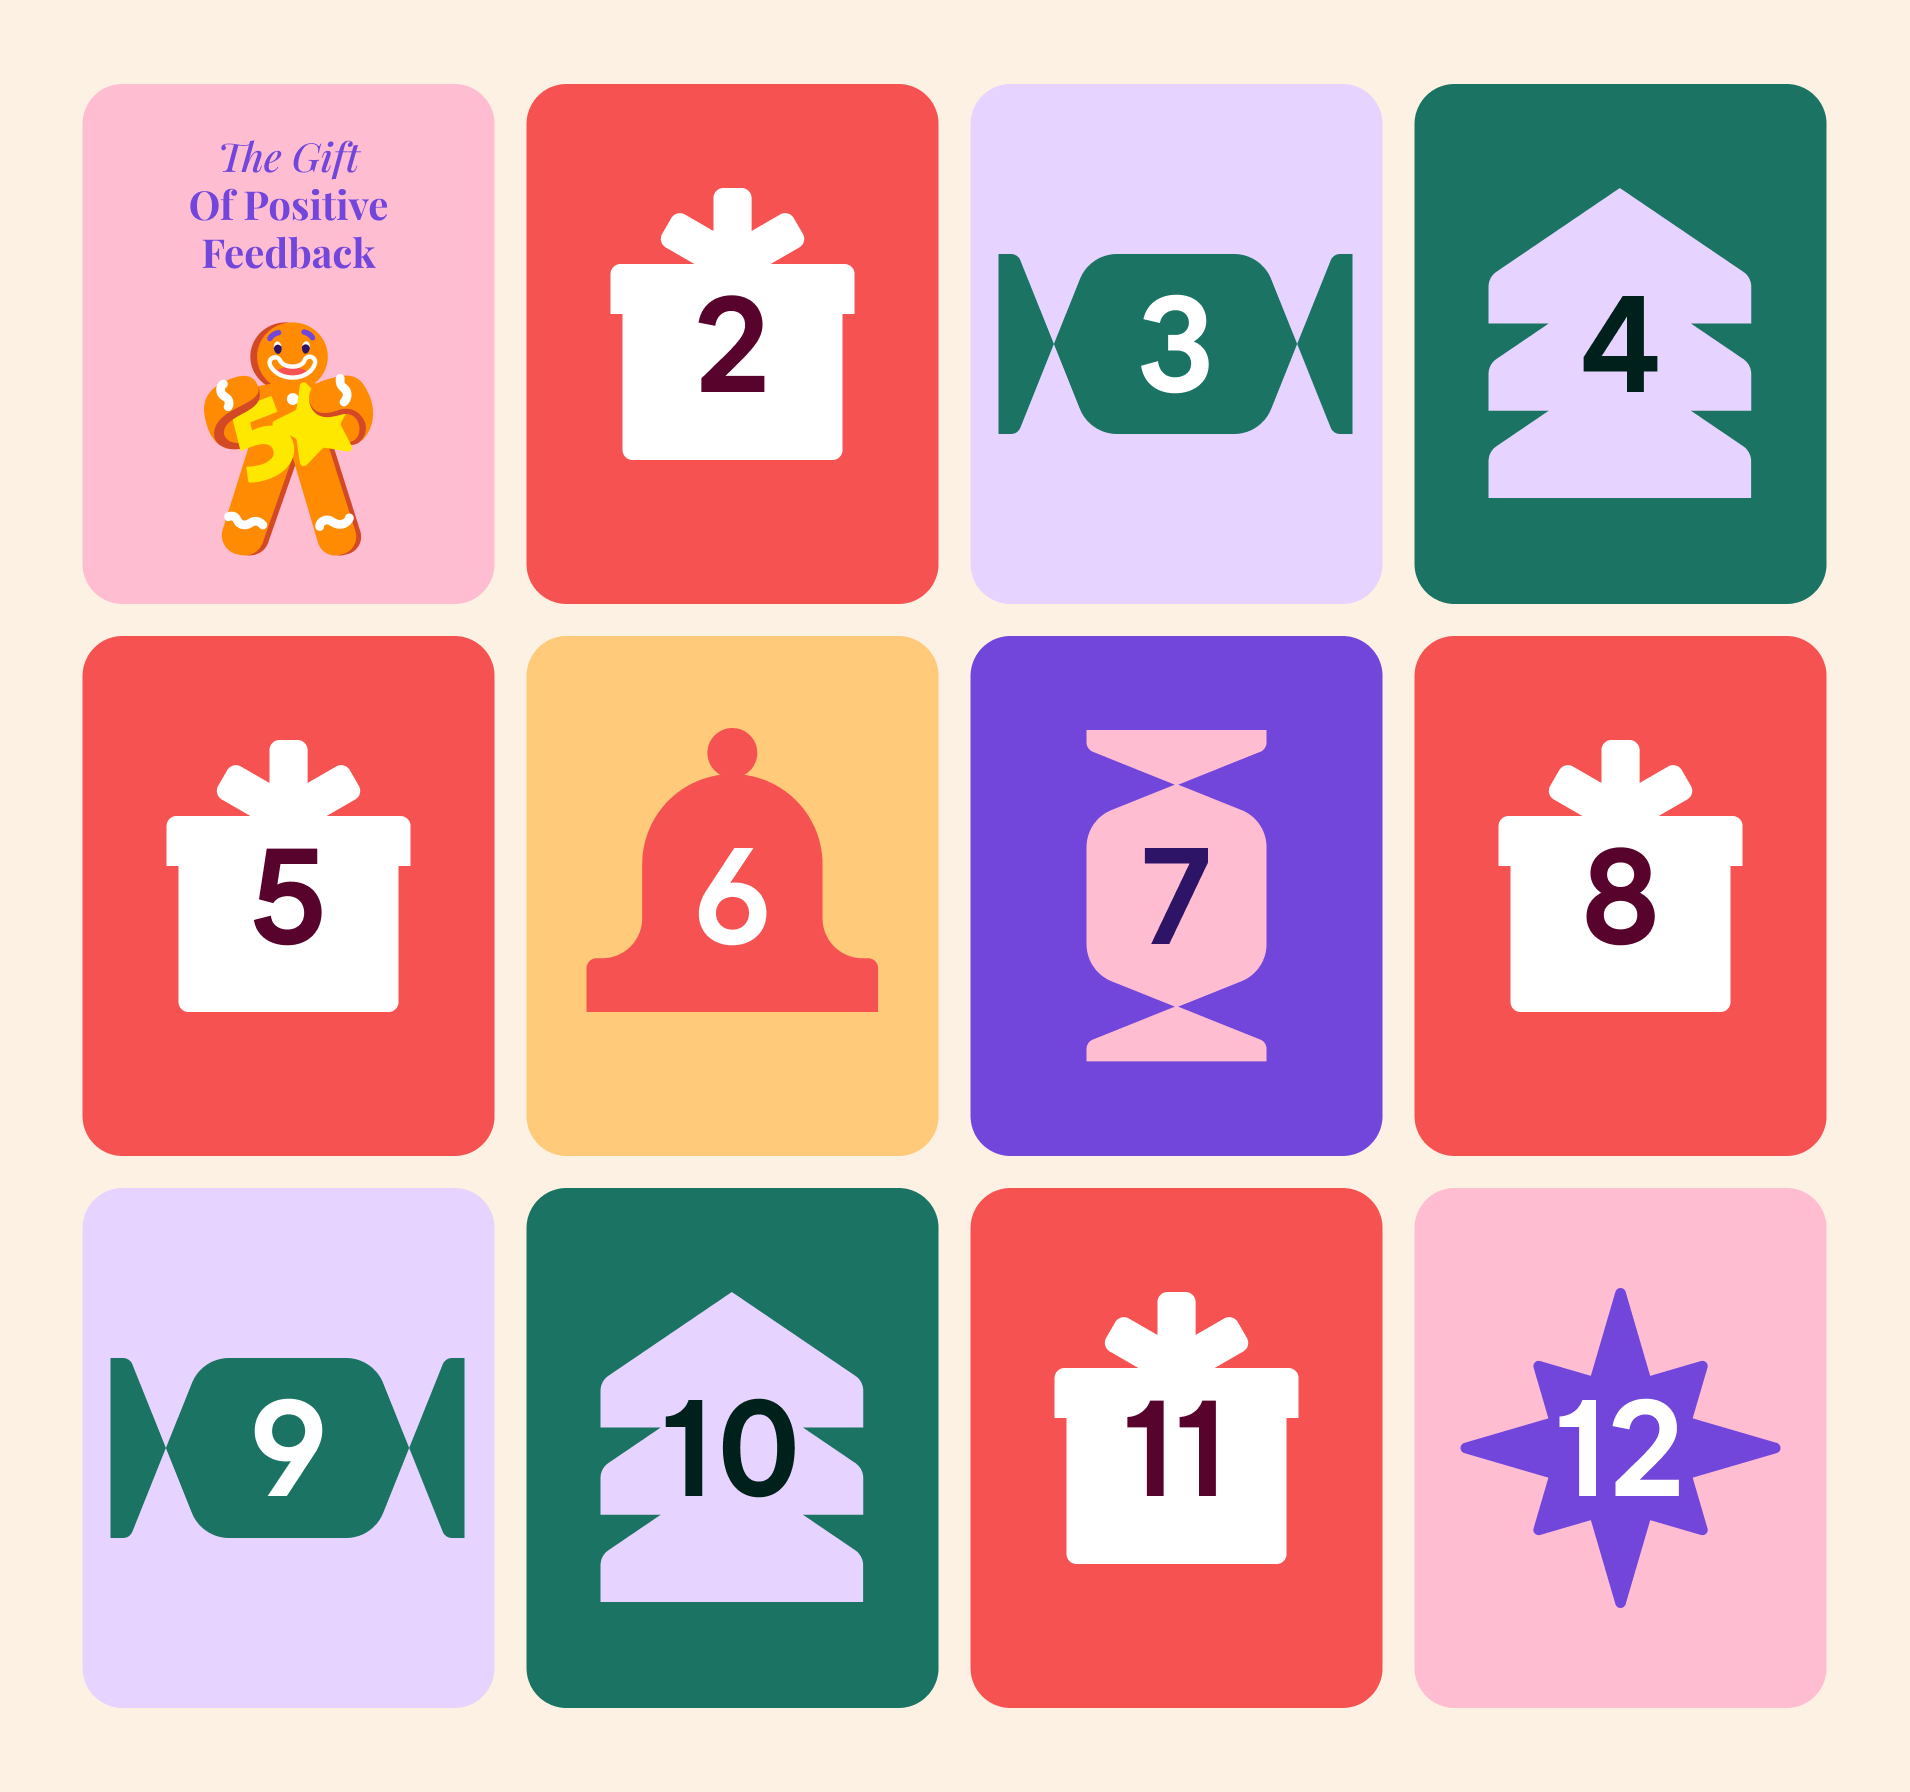 Make Your Season Merry with This Holiday Marketing Calendar